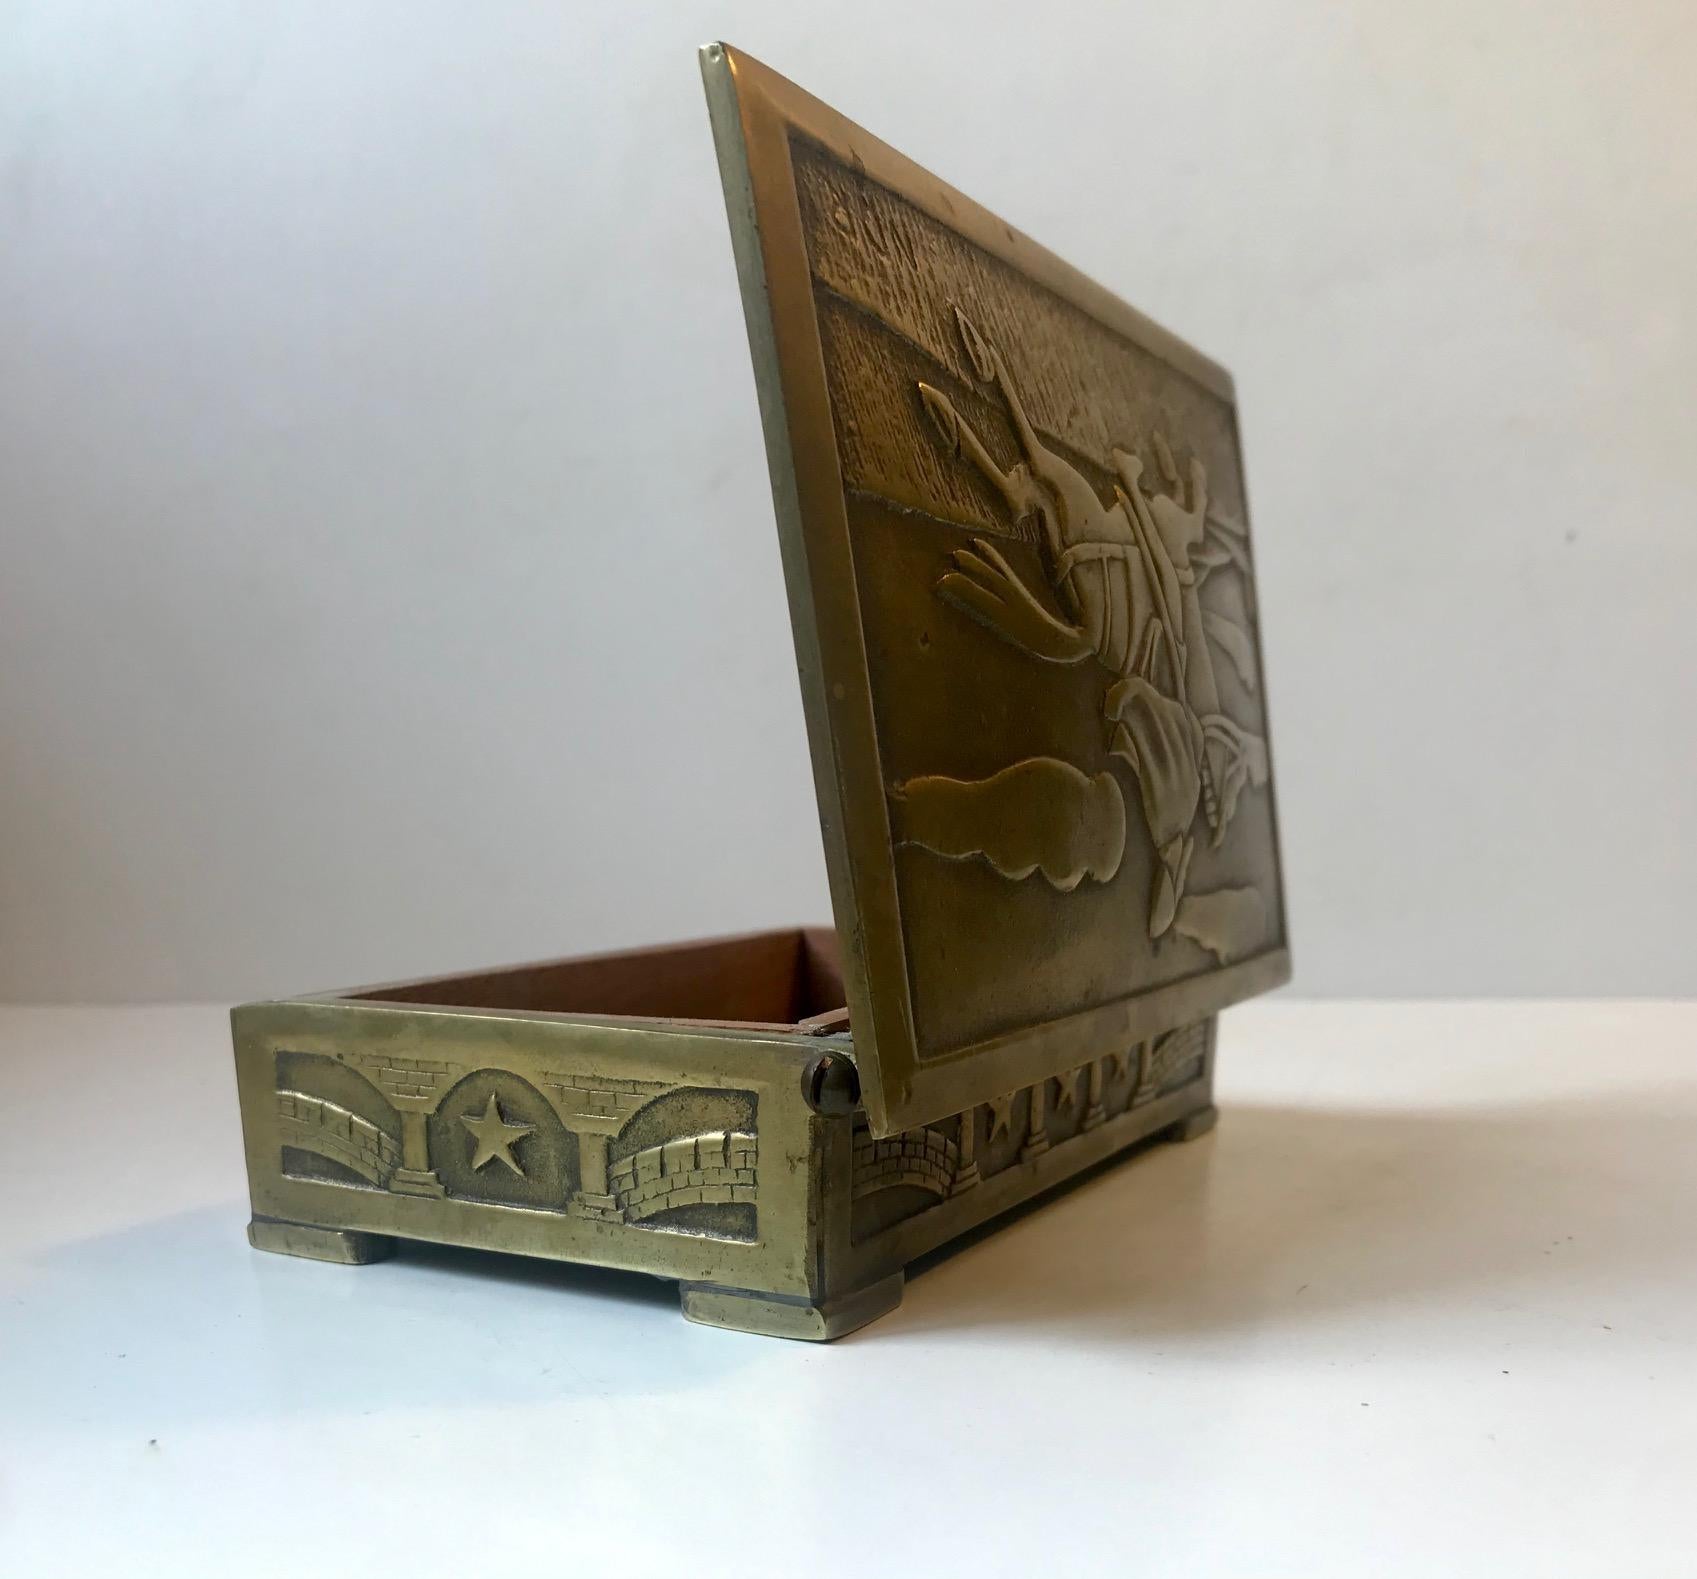 - Heavy Art Deco bronze box with soldier on horse in relief.
- Art deco interpretation of medieval themes
- Clean and strict architectural design despite the Classic motif.
- Golden, rich and original patina
- It was manufactured in Denmark